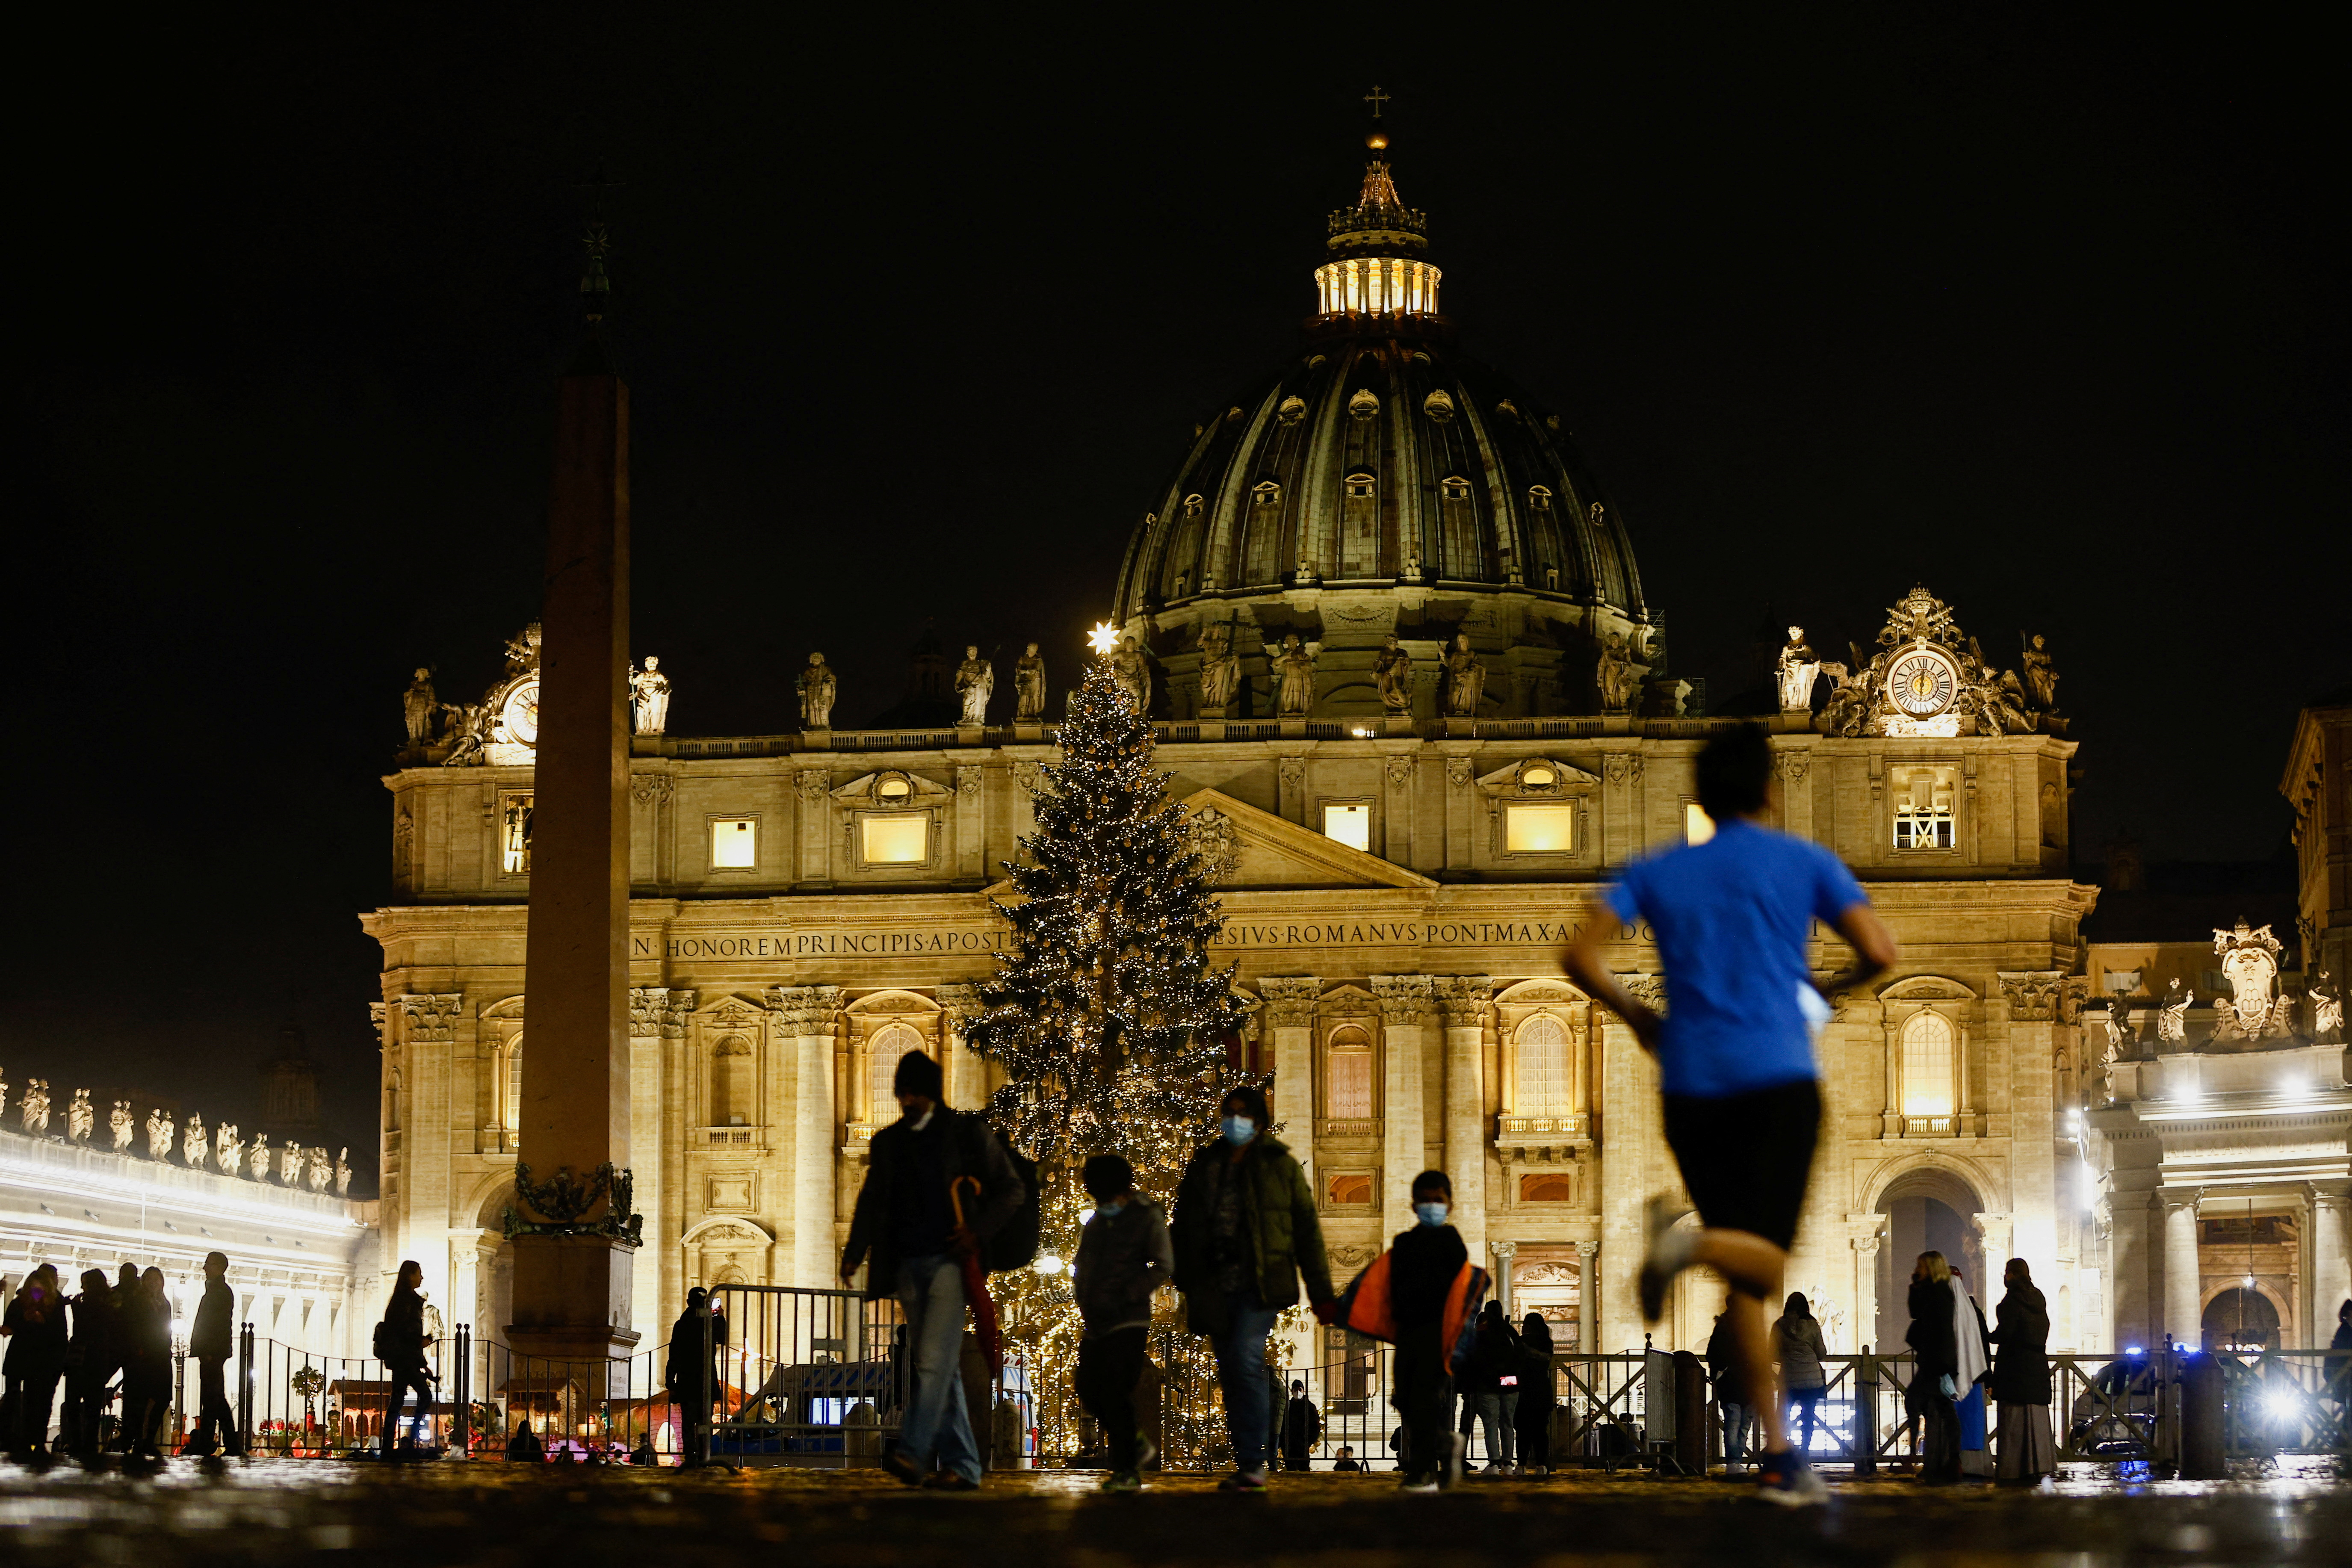 People gather in St. Peter's Square ahead of Christmas Eve mass celebrated by Pope Francis at the Vatican, December 24, 2021. REUTERS/Guglielmo Mangiapane